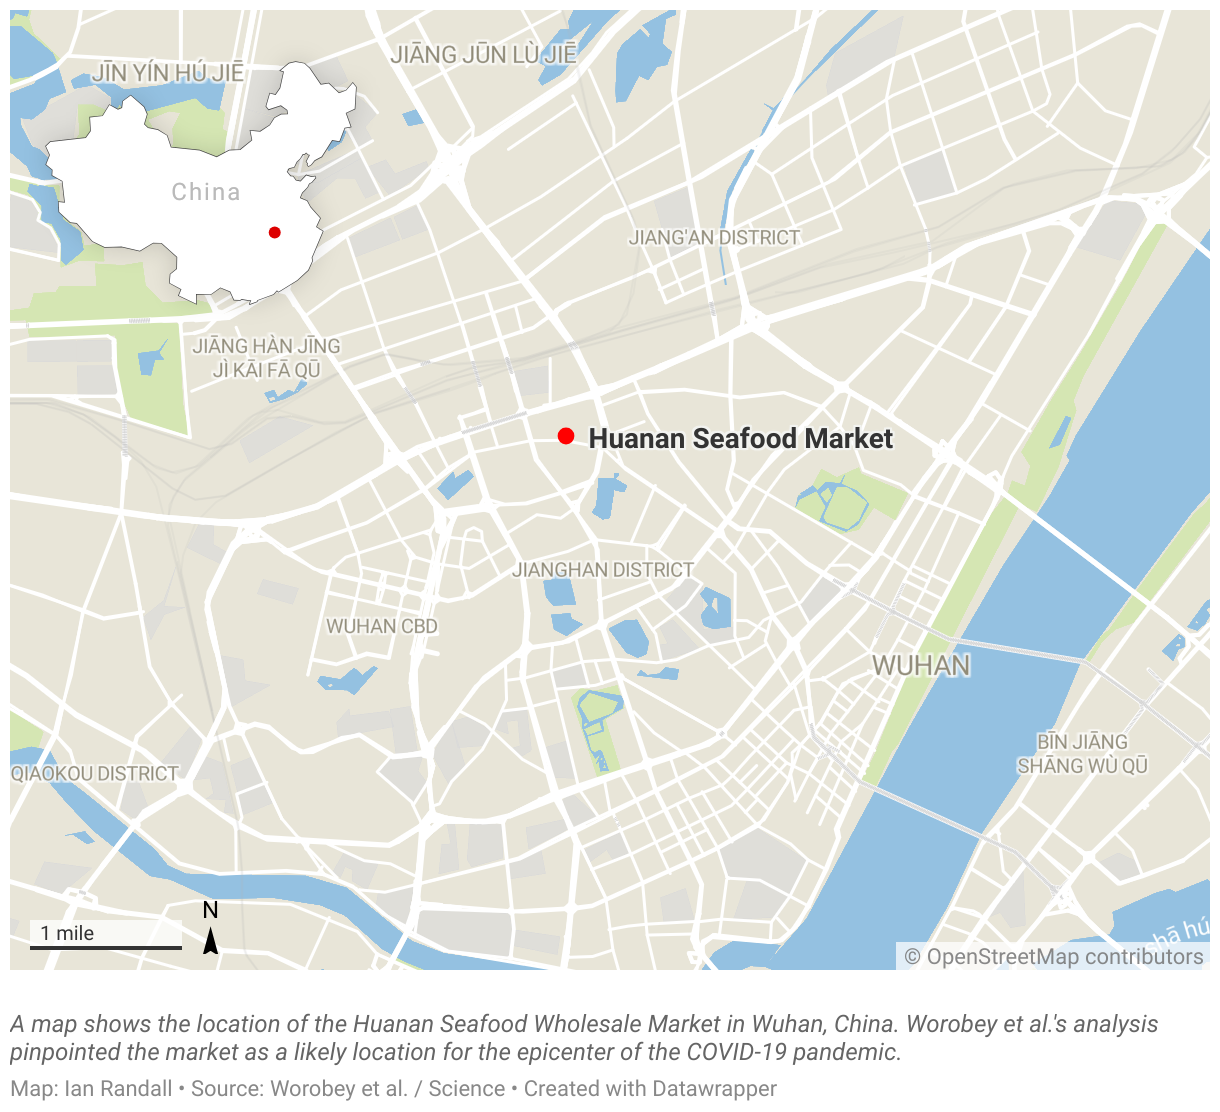 A map shows the location of the Huanan Seafood Wholesale Market in Wuhan, China.